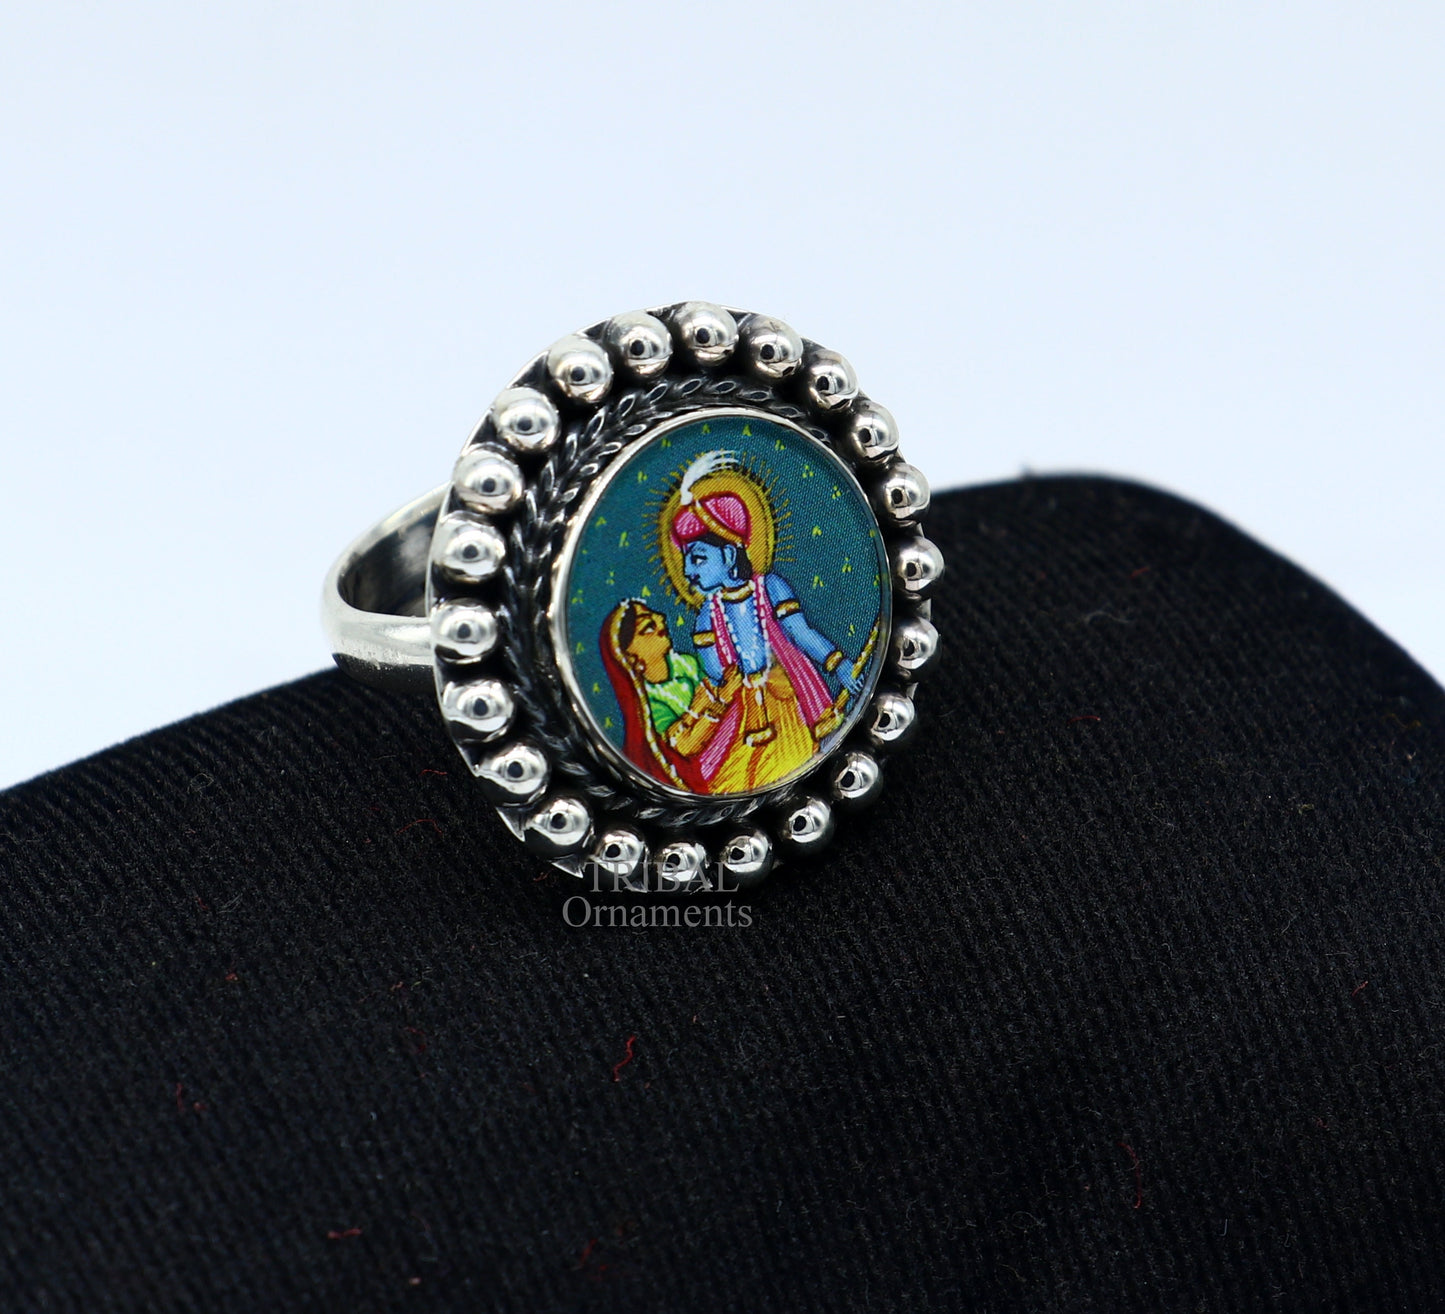 925 sterling silver adjustable ring band fabulous lord Krishna with Radha miniature art painting ring Stylish ethnic party jewelry RRing527 - TRIBAL ORNAMENTS